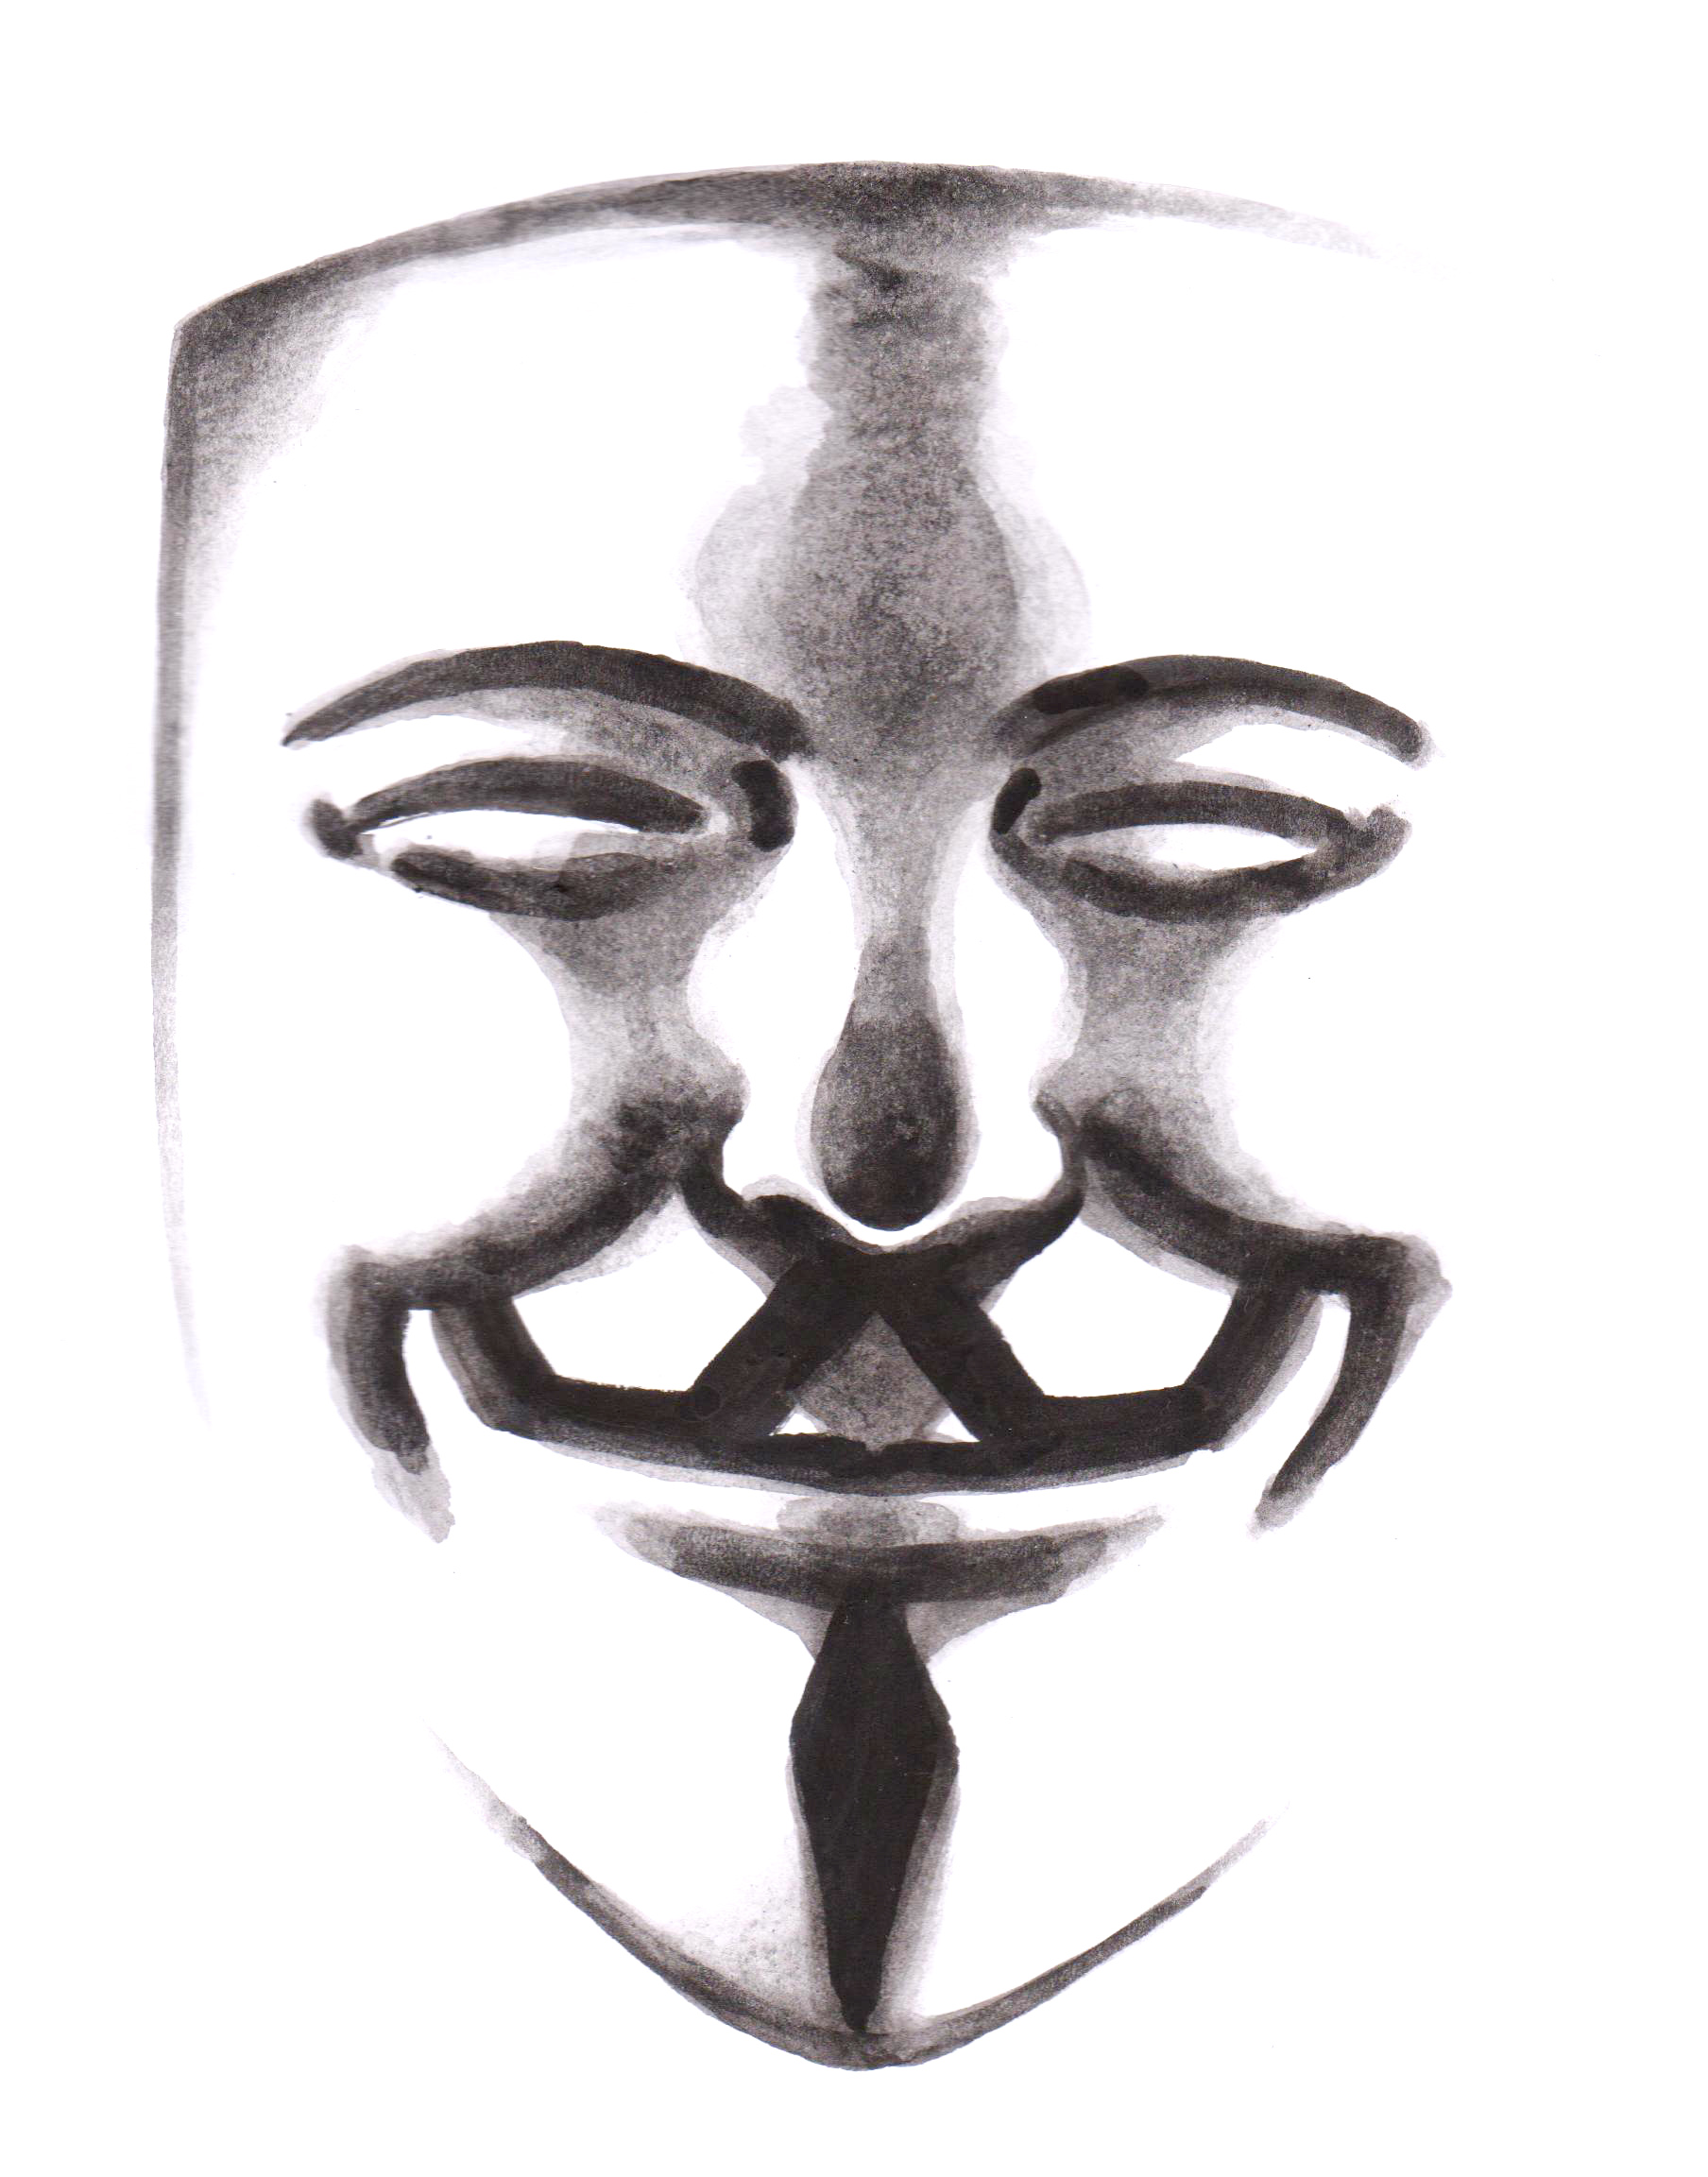 An early pencil drawing of the guy fawkes mask used in V for Vendetta